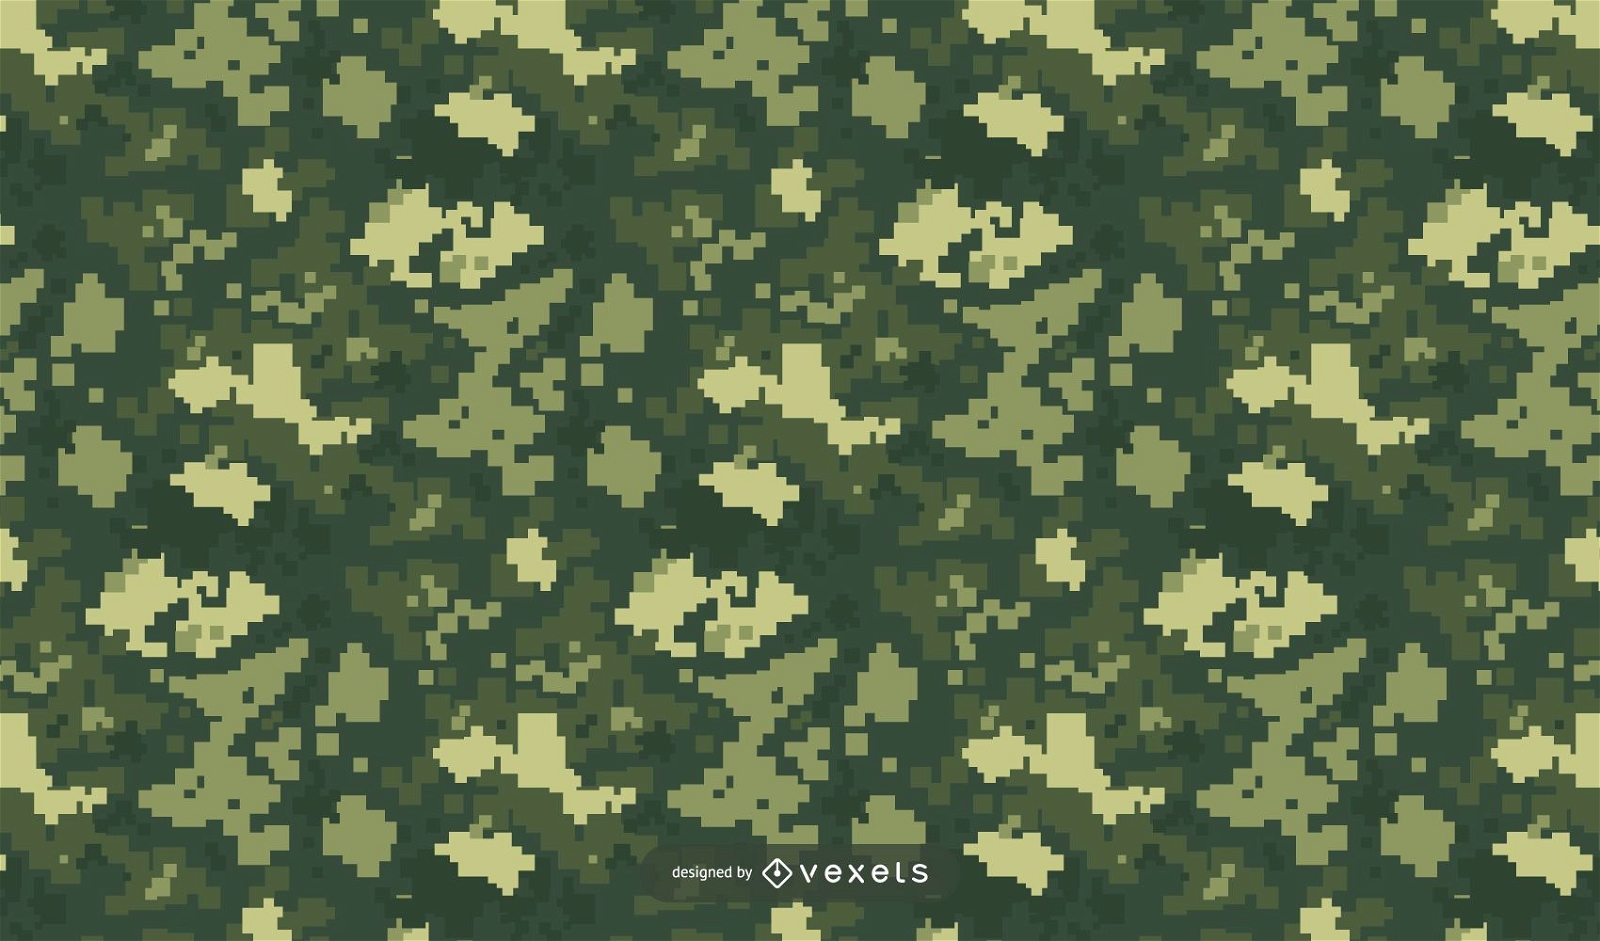 https://images.vexels.com/content/204079/preview/pixelated-green-camo-pattern-0d1249.png